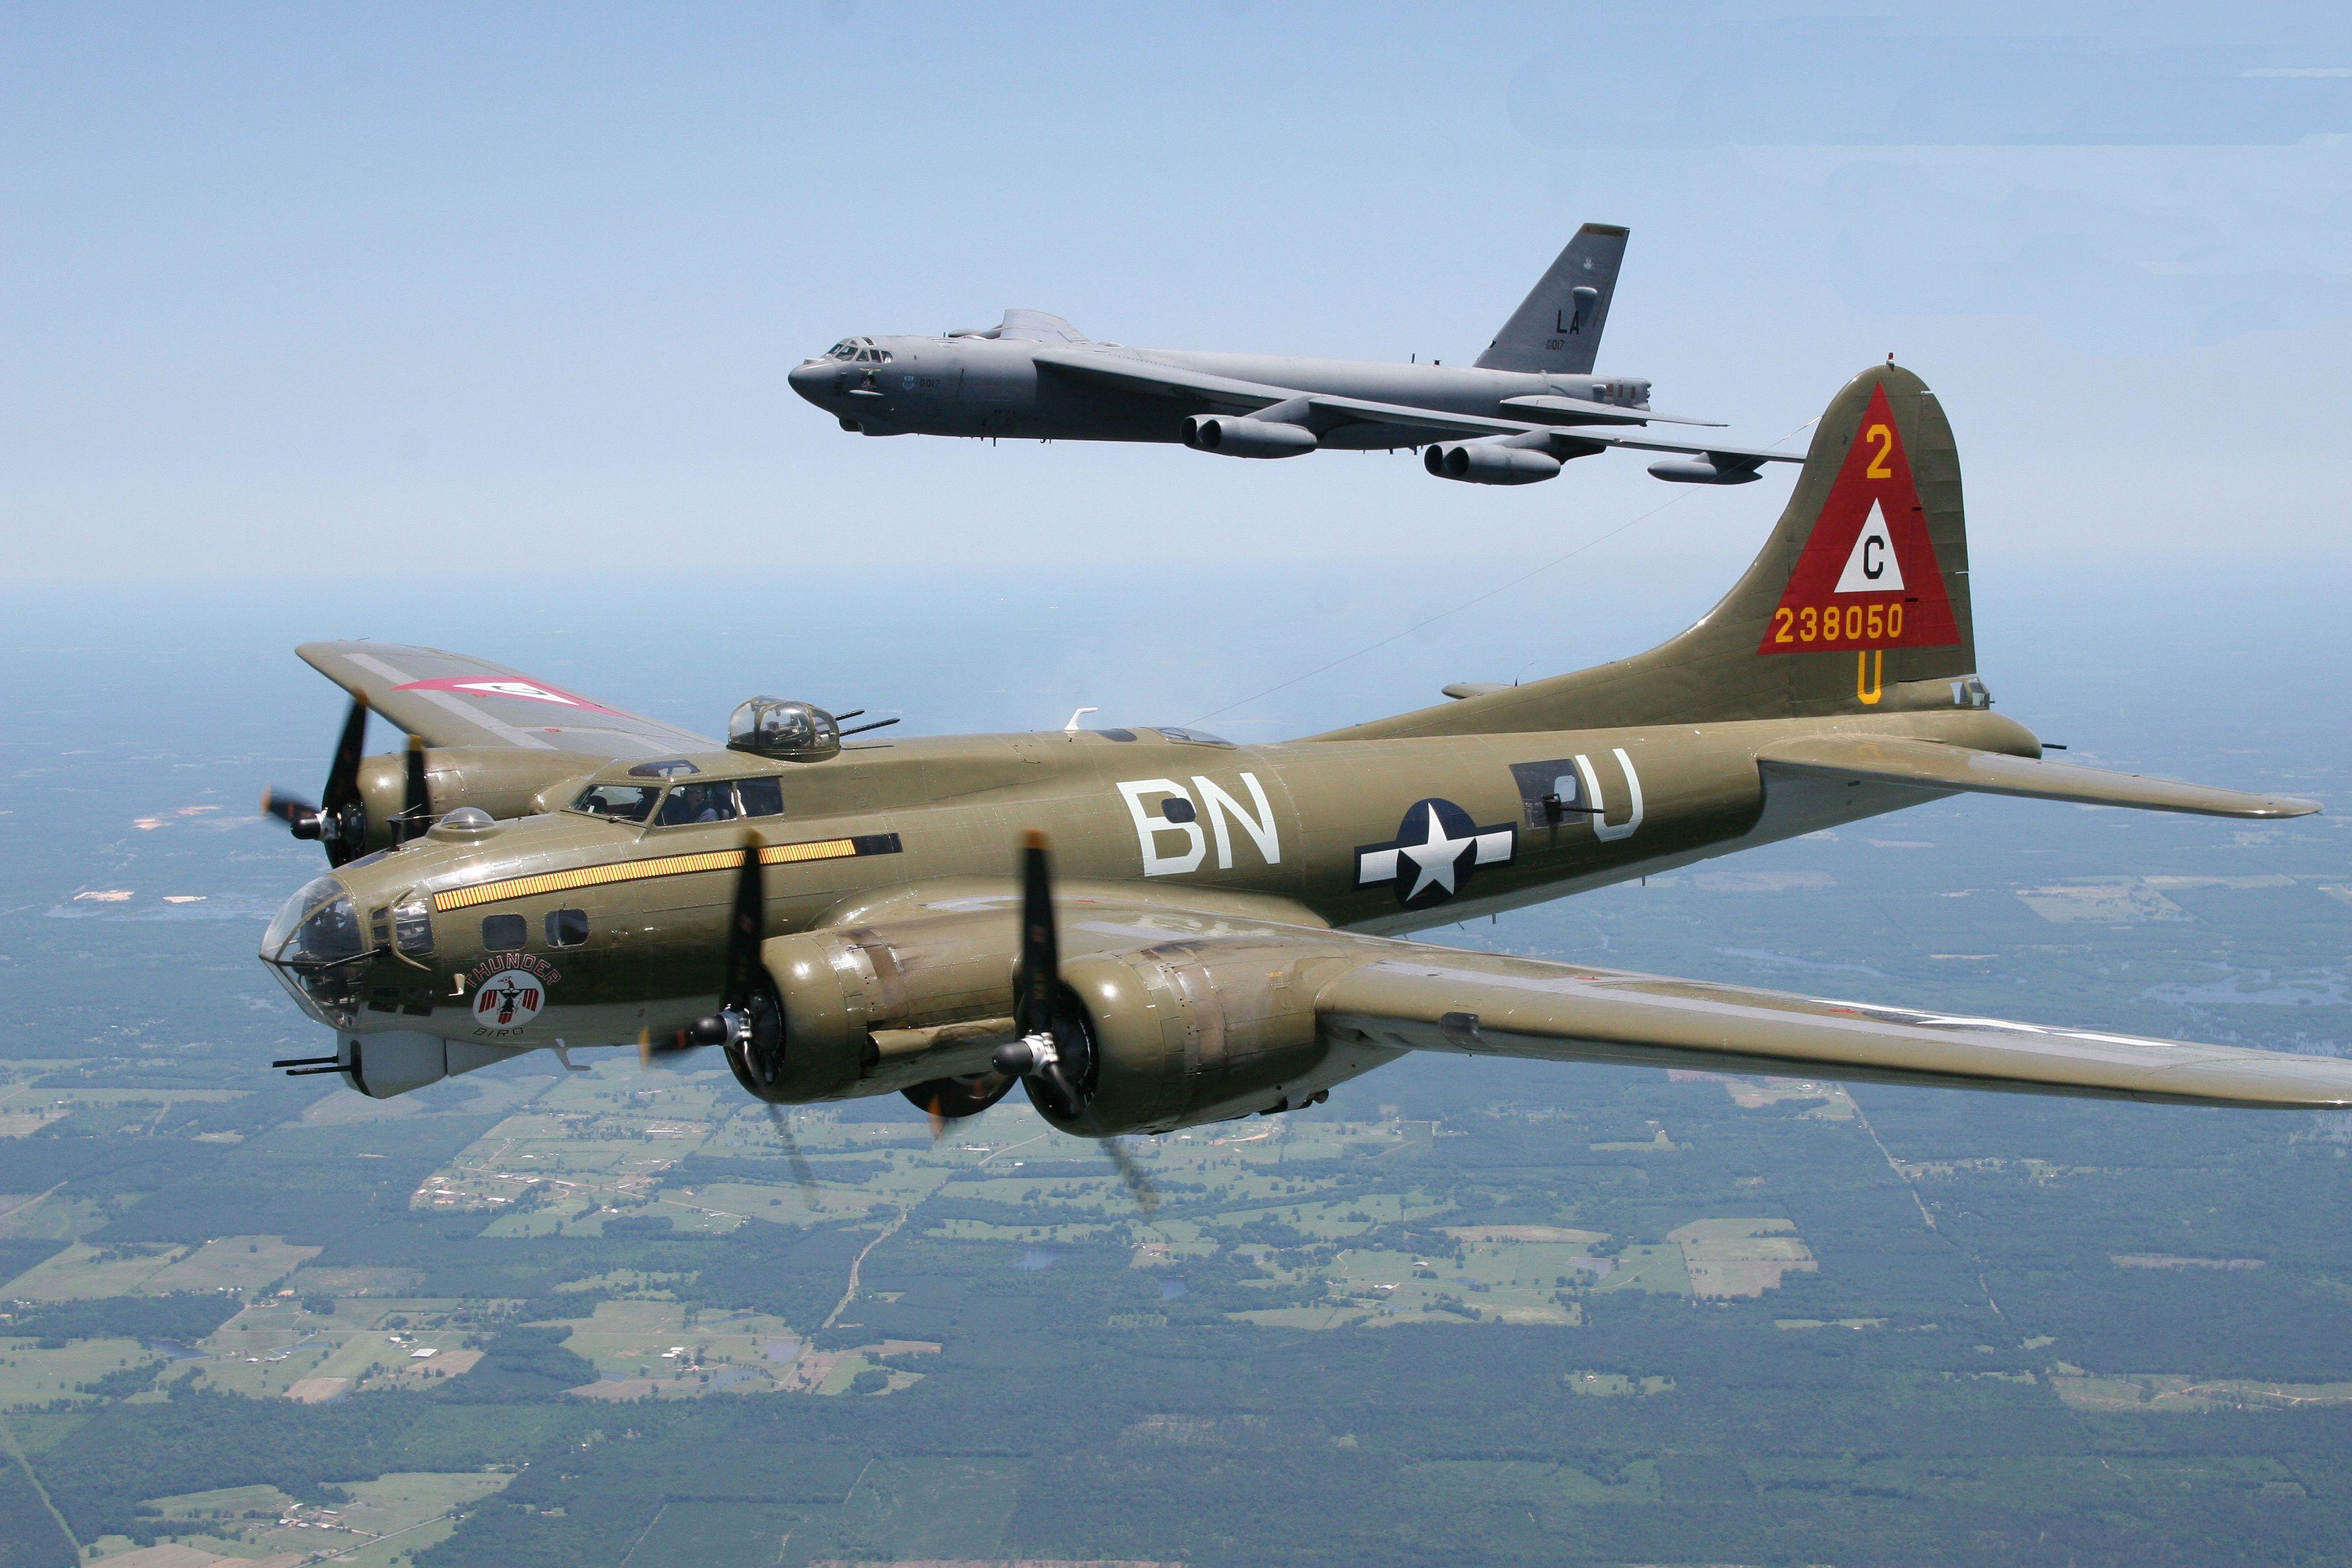 Boeing B-17 Flying Fortress Wallpapers